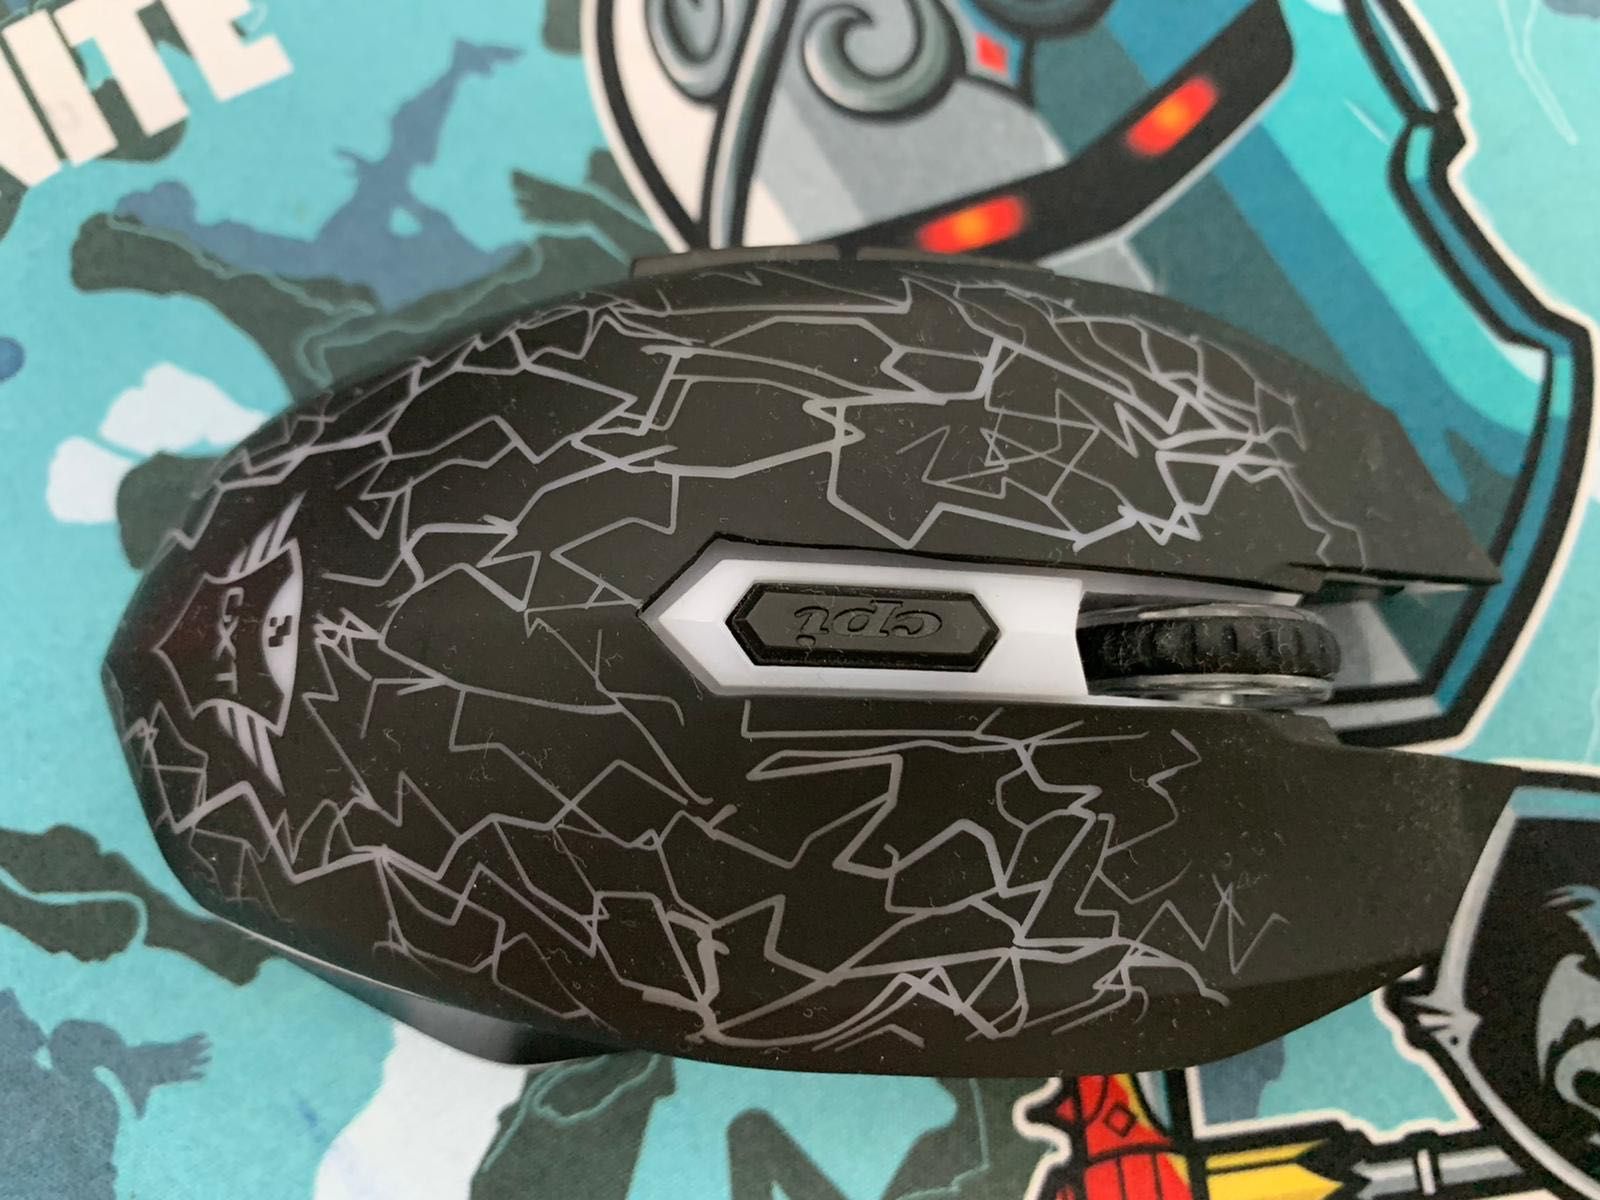 Vând mouse gaming GXT wireless